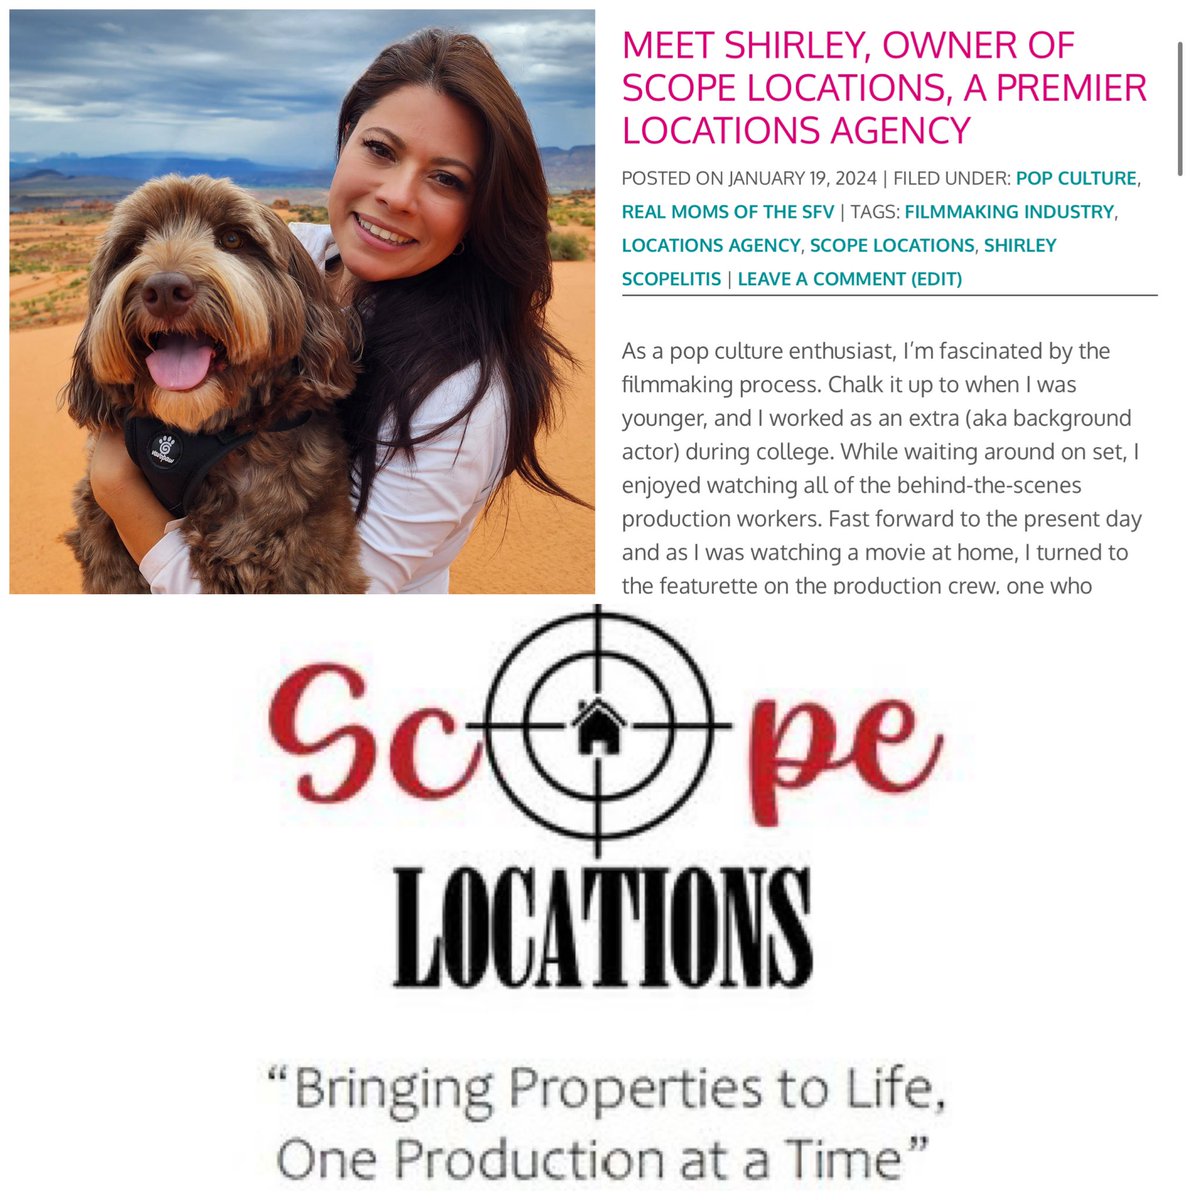 Did you know there is an agency & website that will help you find the perfect beach house or office setting to use in film or TV production? Meet #ShirleyScopelitis, the owner of #ScopeLocations, a premier locations agency! bit.ly/3S8uPCE #movieproduction #locationscout